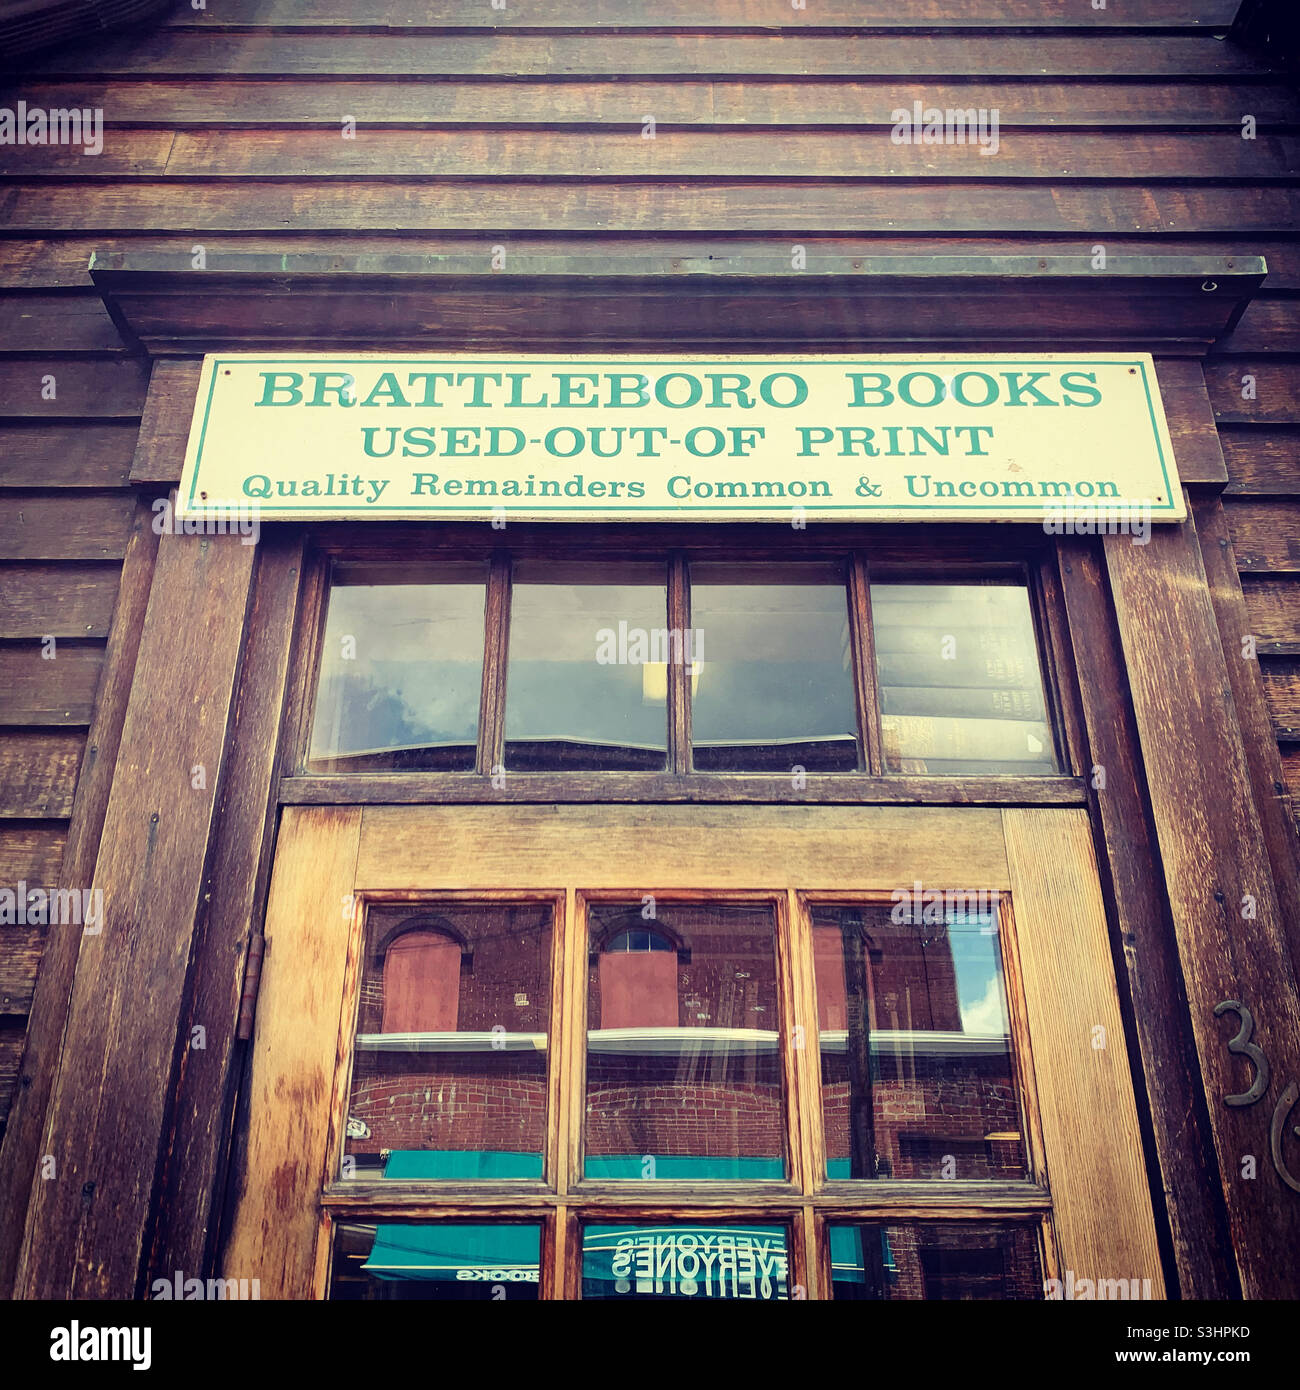 “Brattleboro Books. Used-Out-of Print. Quality Remainders. Common and Uncommon,” Brattleboro, Vermont, United States Stock Photo